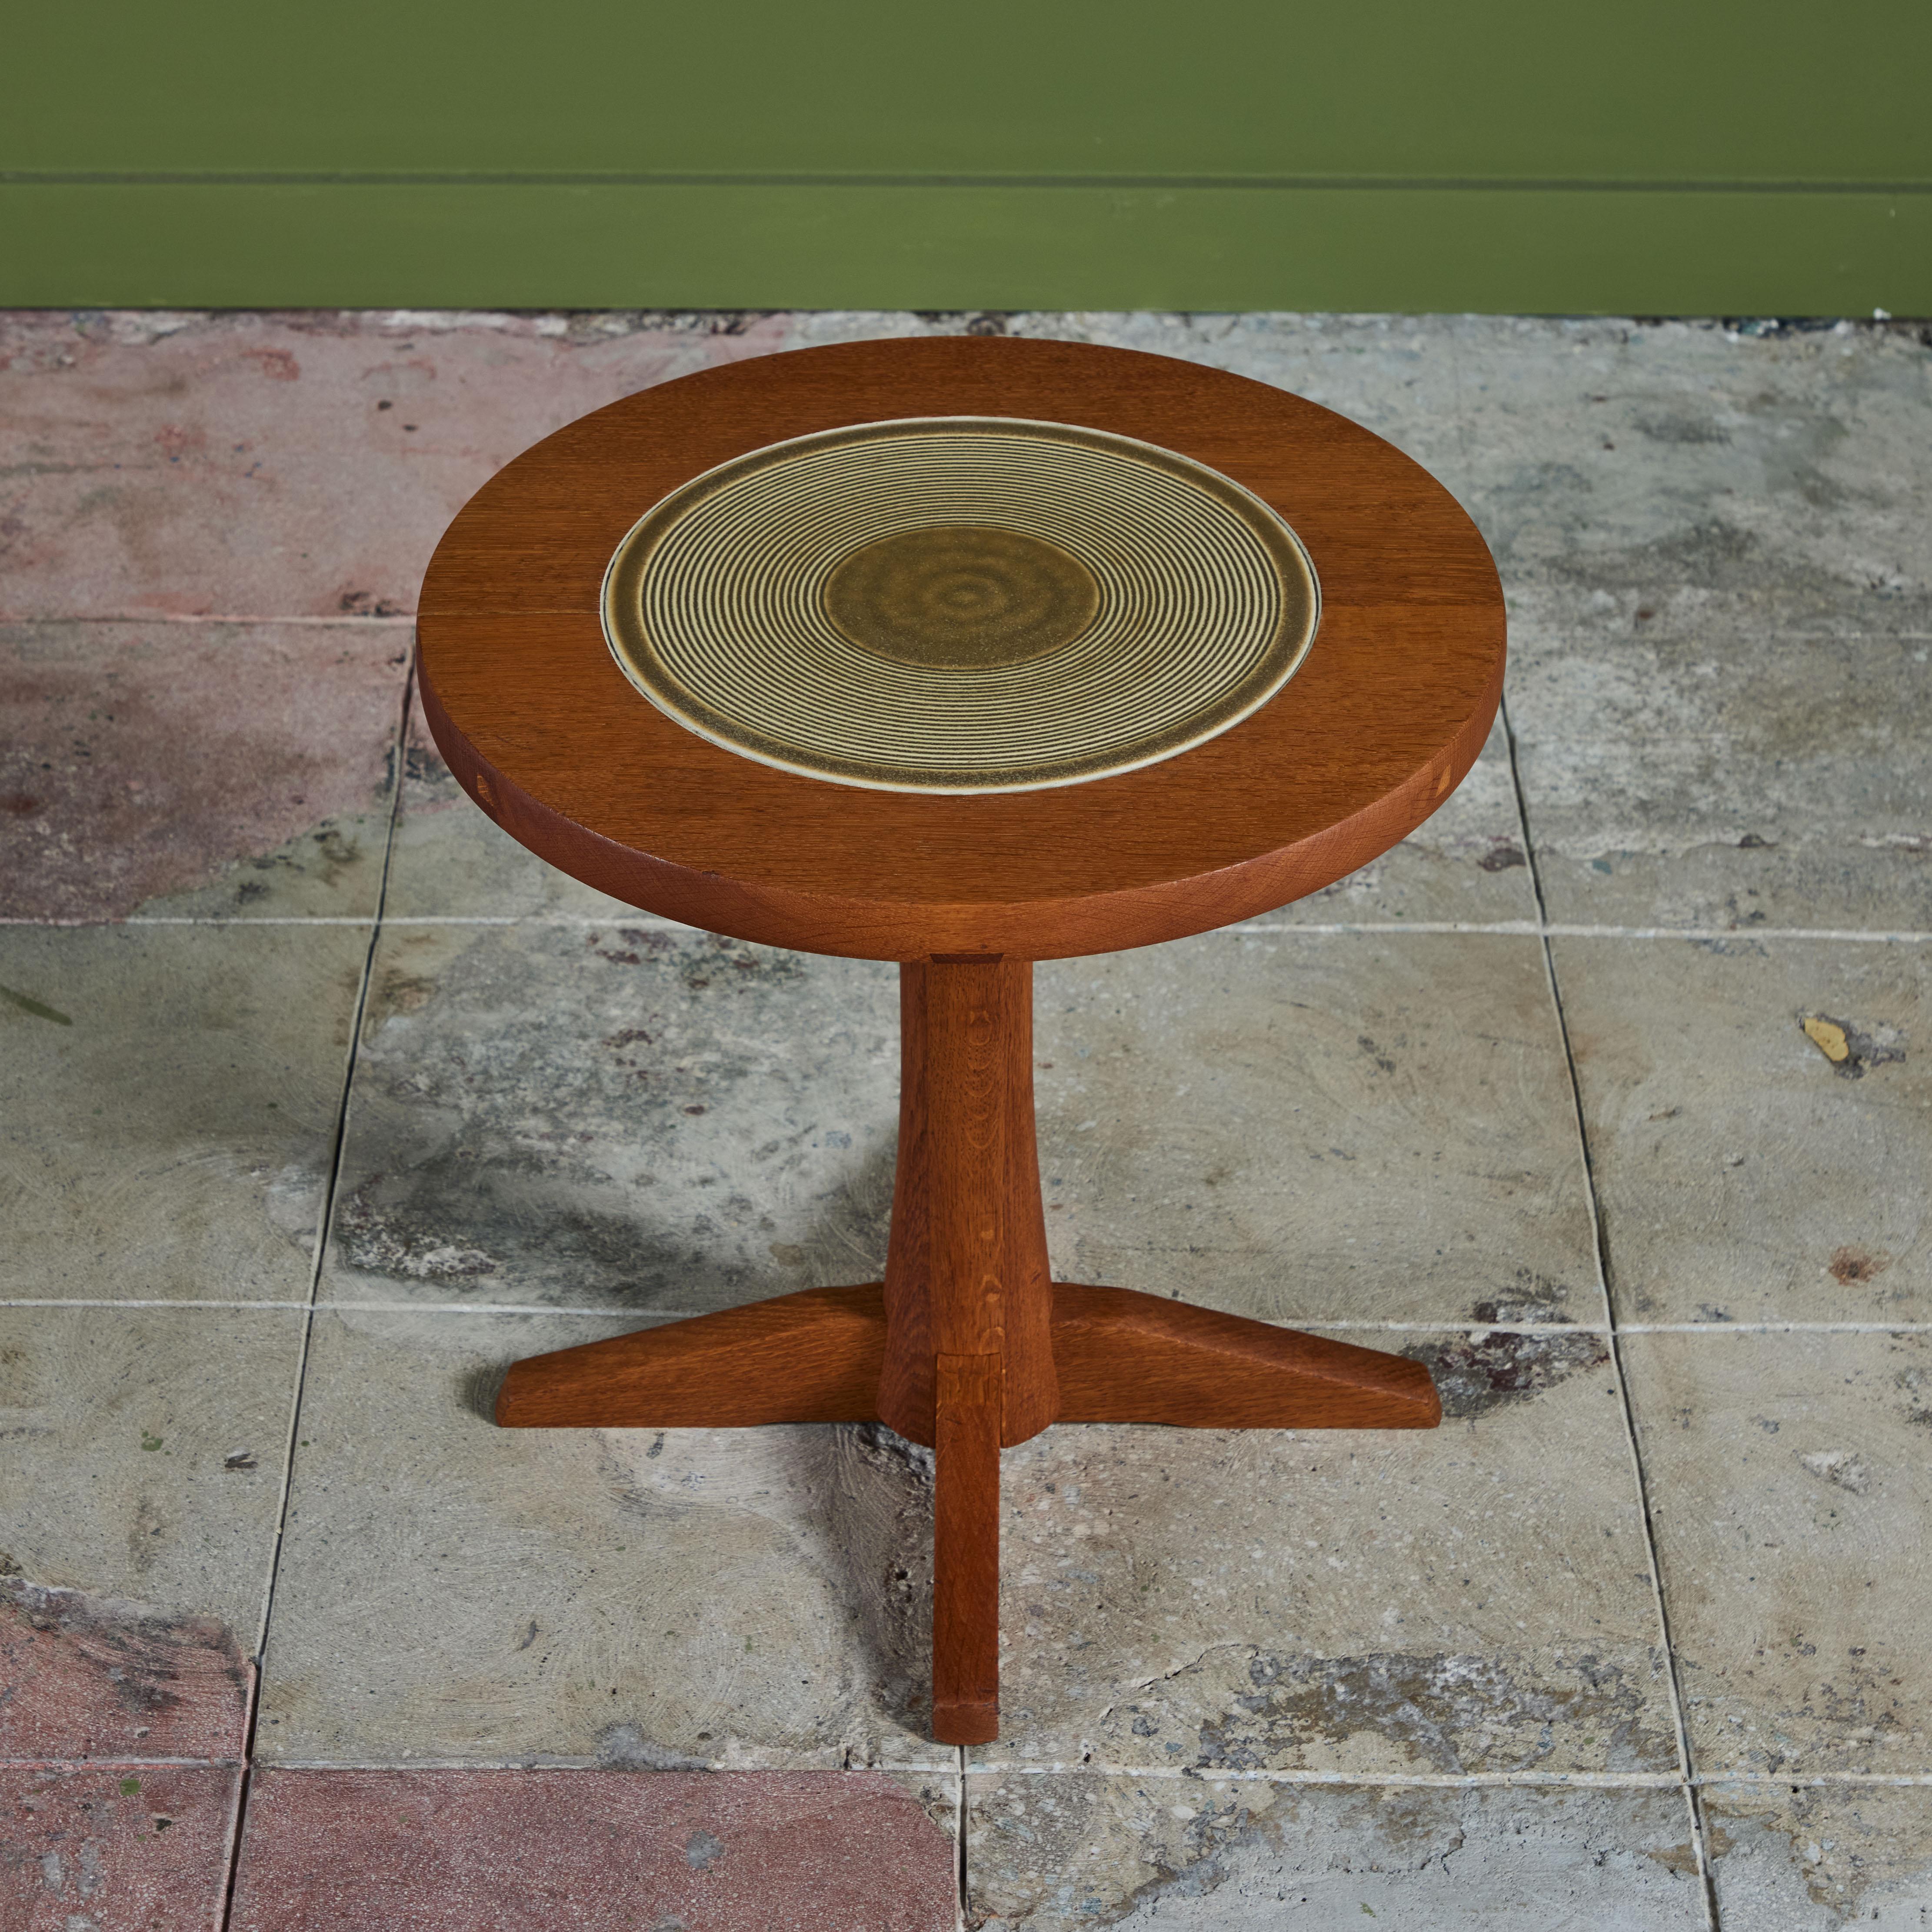 20th Century Jens H. Quistgaard Oak Side Table with Tile Inlay